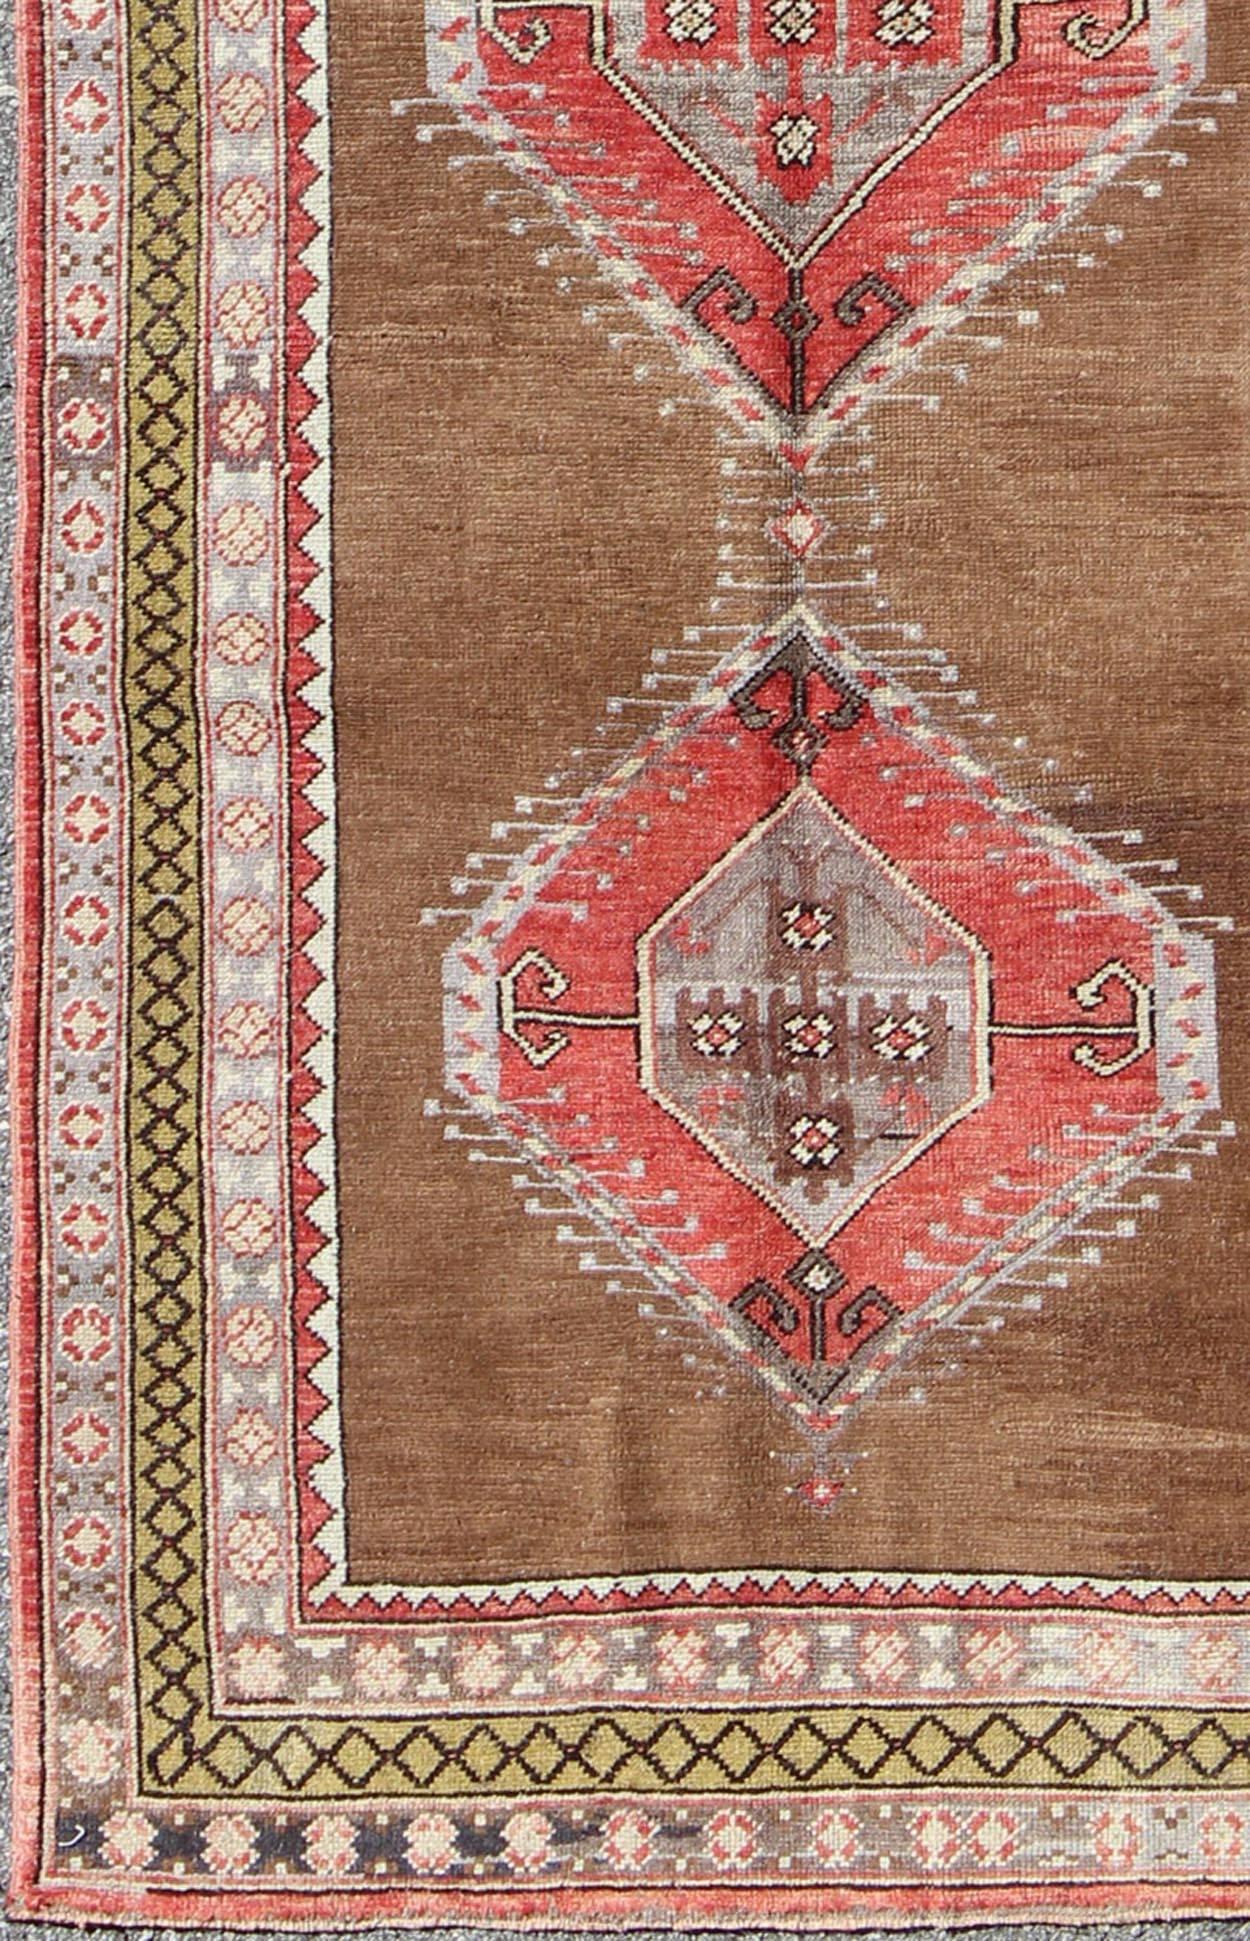 This beautiful vintage Oushak runner from mid-20th century Turkey features a Classic Oushak design, which is enhanced by its lustrous wool. The faint brown ground is home to three large and elegant medallions of red, brown, gray, charcoal and ivory